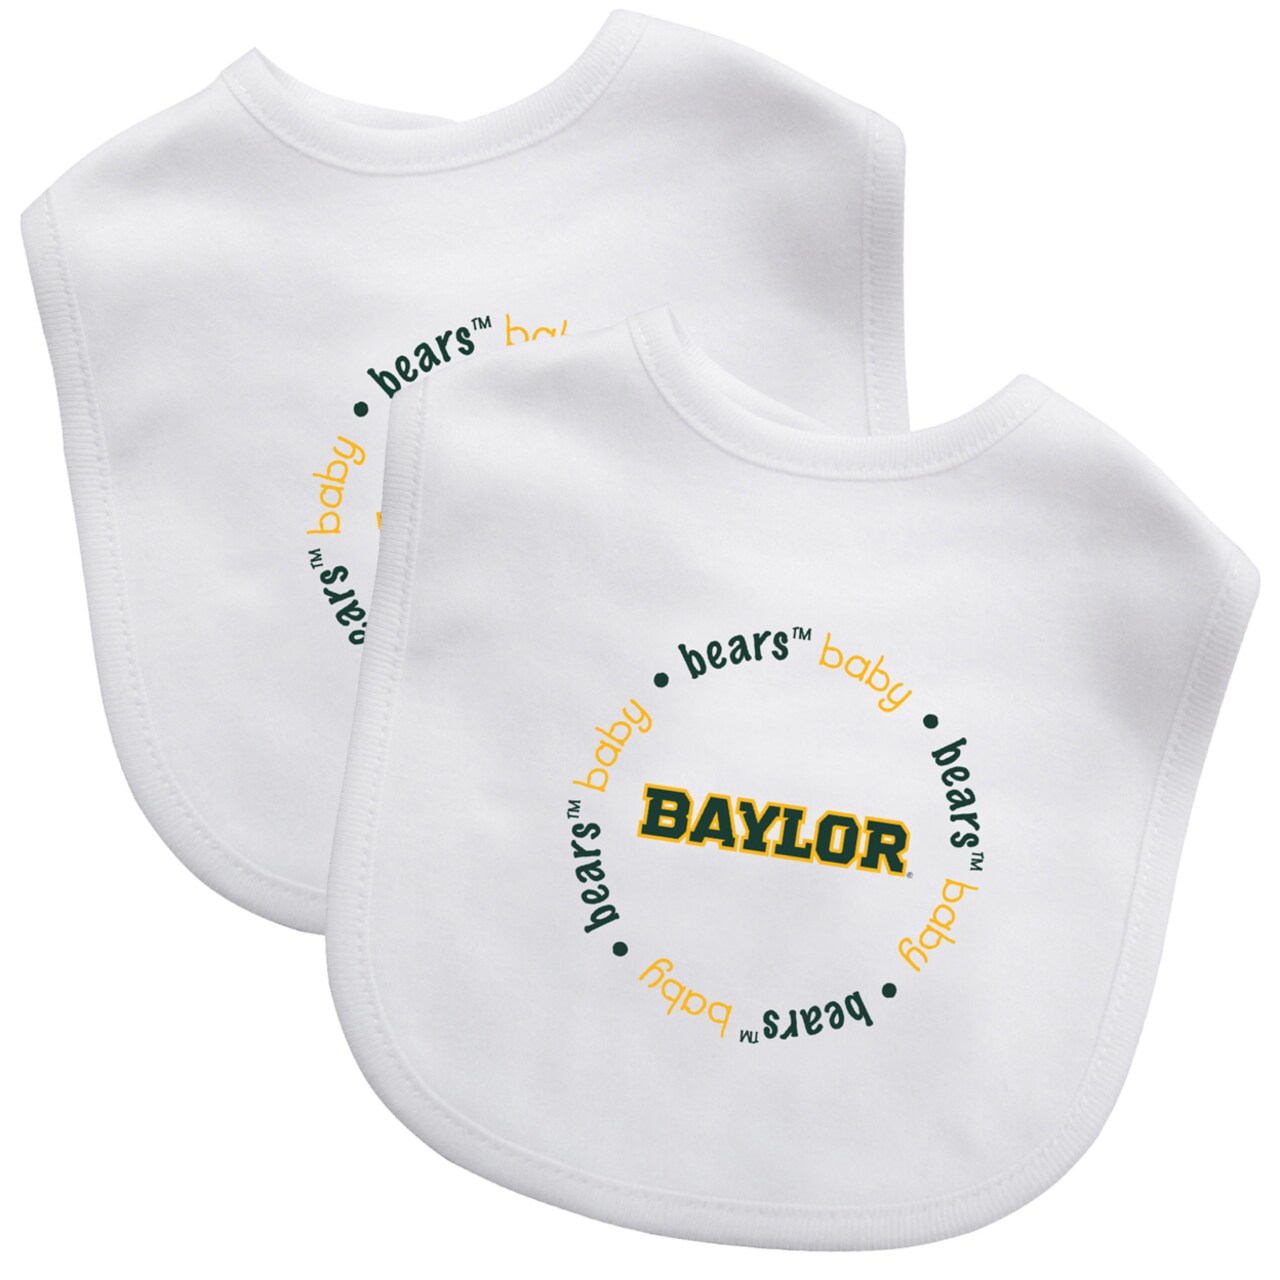 Baby Fanatic   Officially Licensed Unisex Baby Bibs 2 Pack - NCAA Baylor Bears